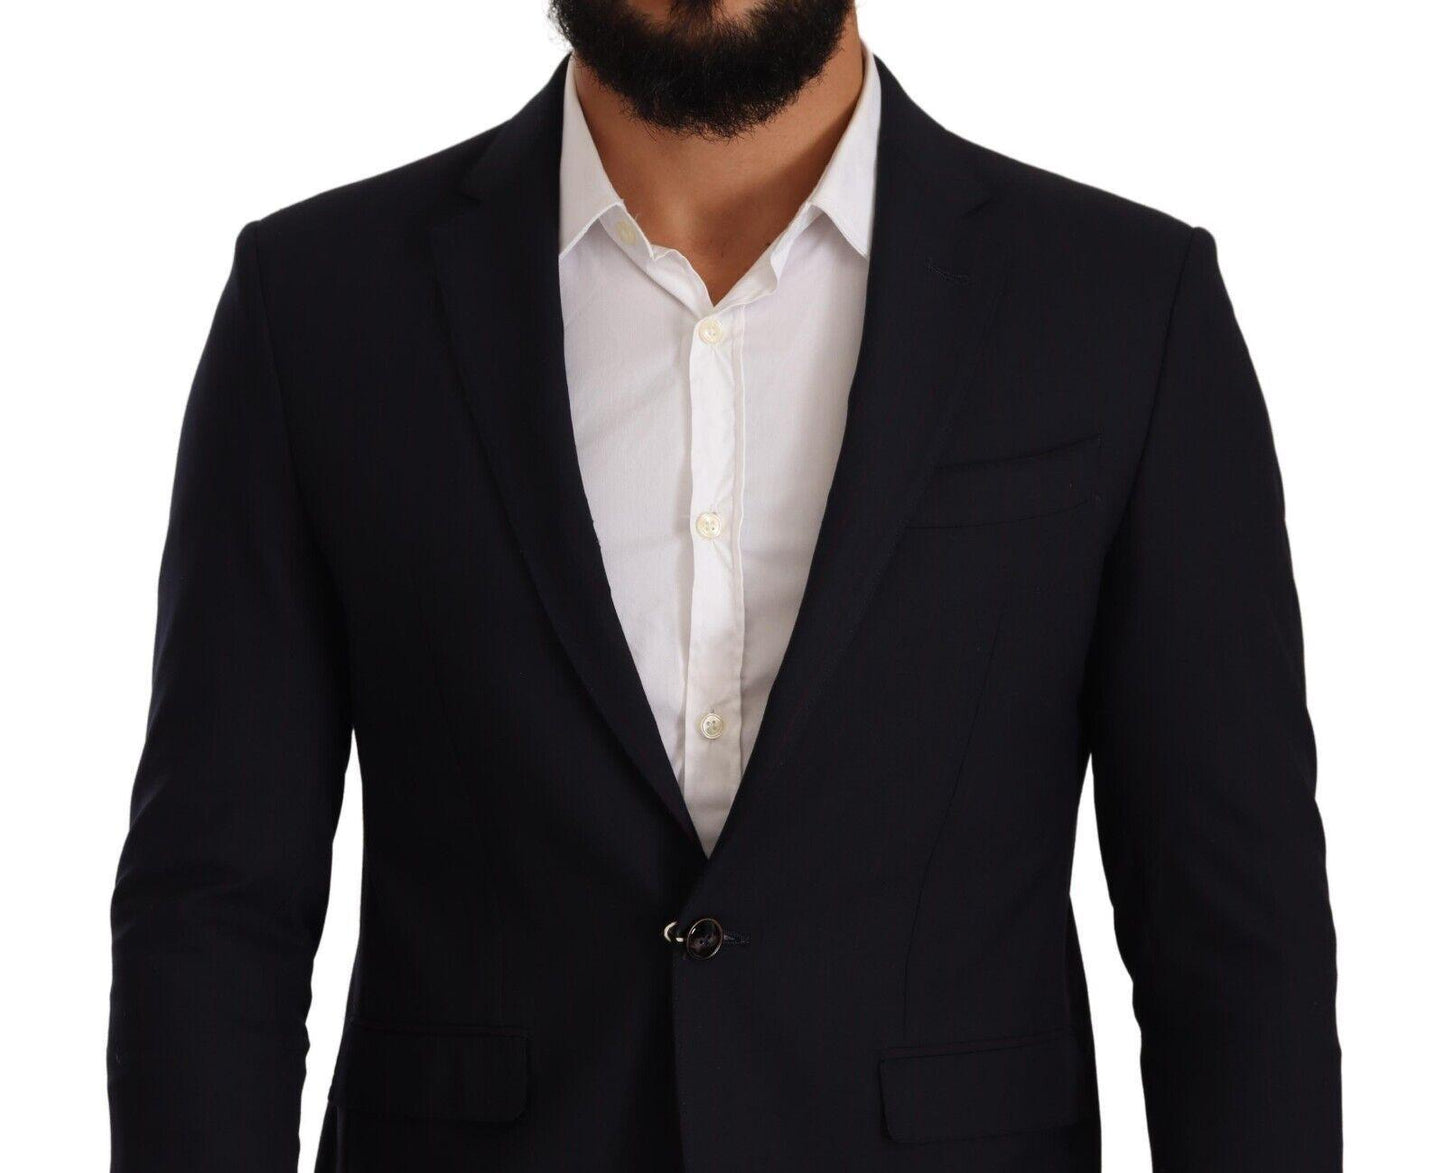 Dolce & Gabbana Black Domenico Tagliente Single Breasted One Button Suit Jacket - Designed by Domenico Tagliente Available to Buy at a Discounted Price on Moon Behind The Hill Online Designer